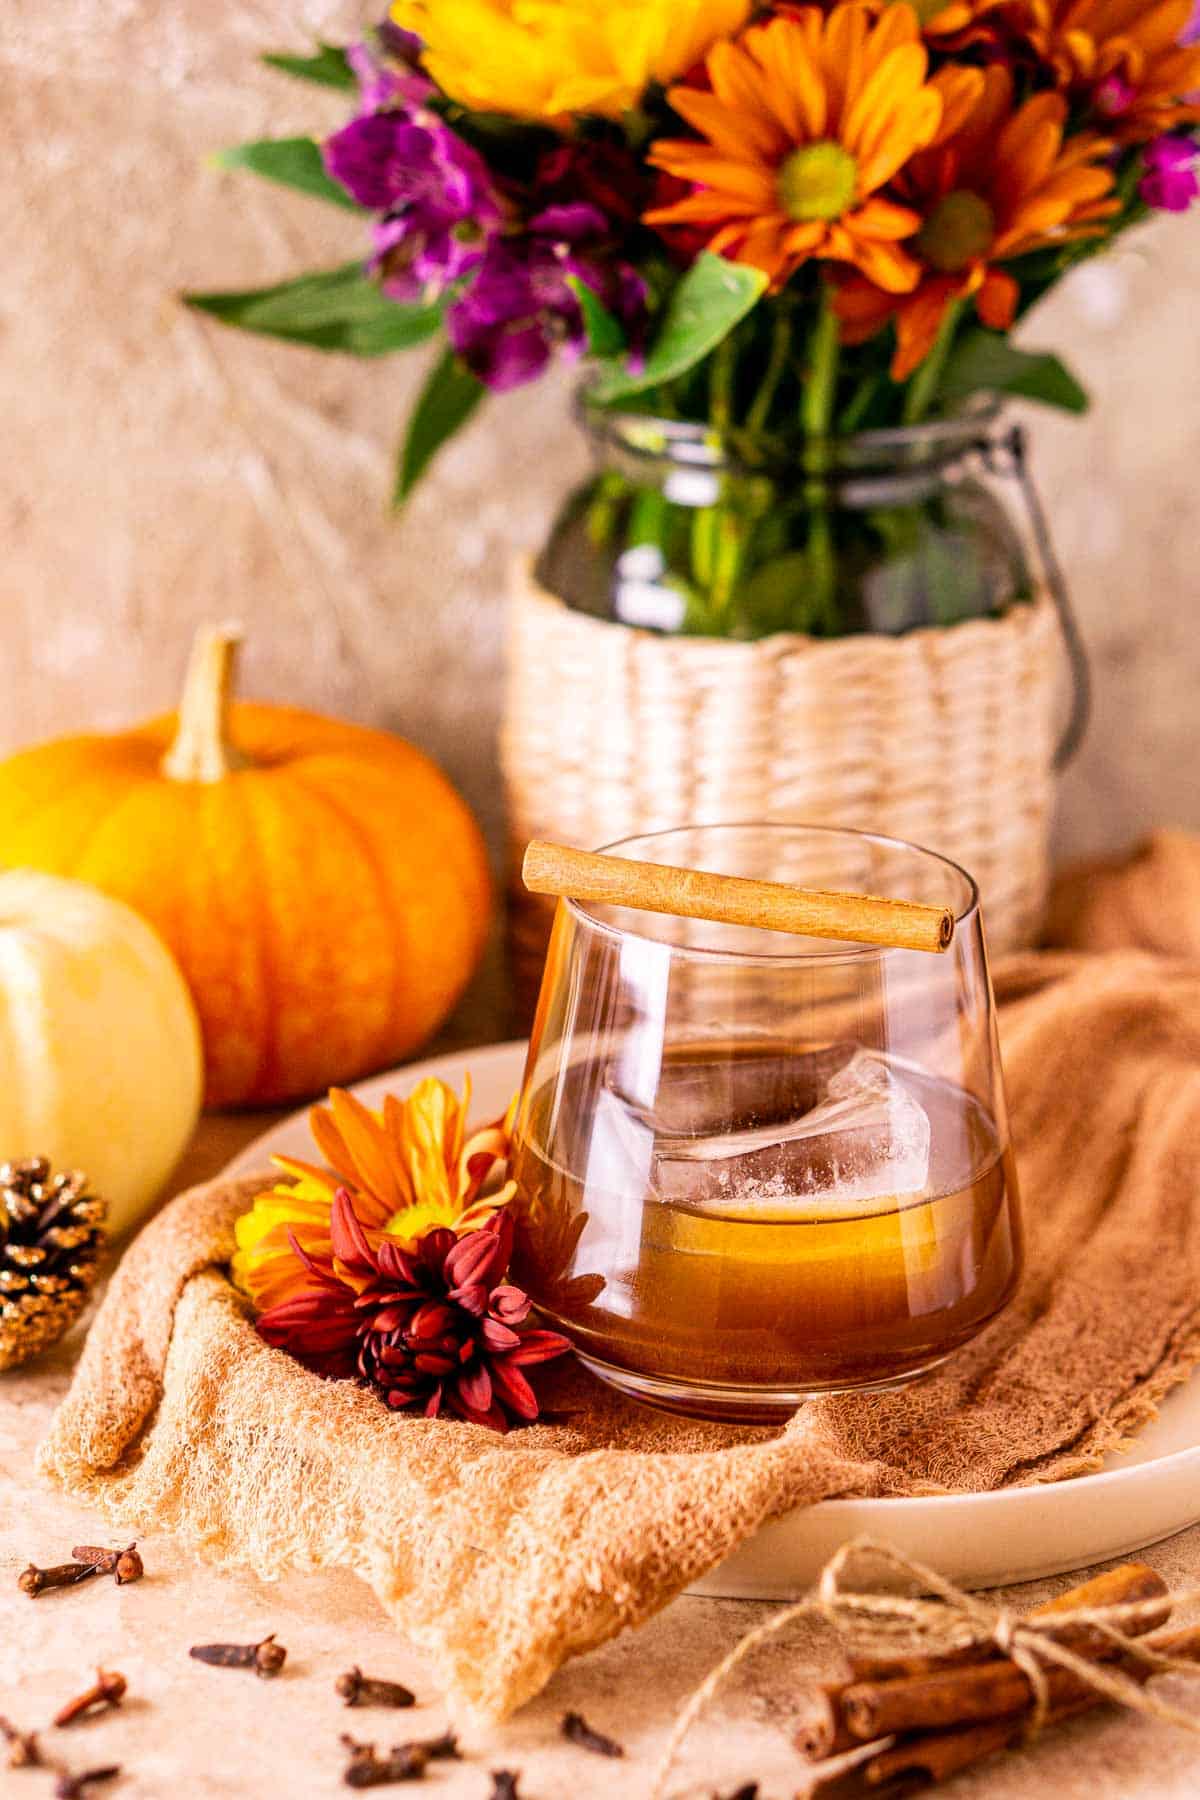 A pumpkin old fashioned on a white plate with fall-colored cloth and colorful flowers on the side of the glass.